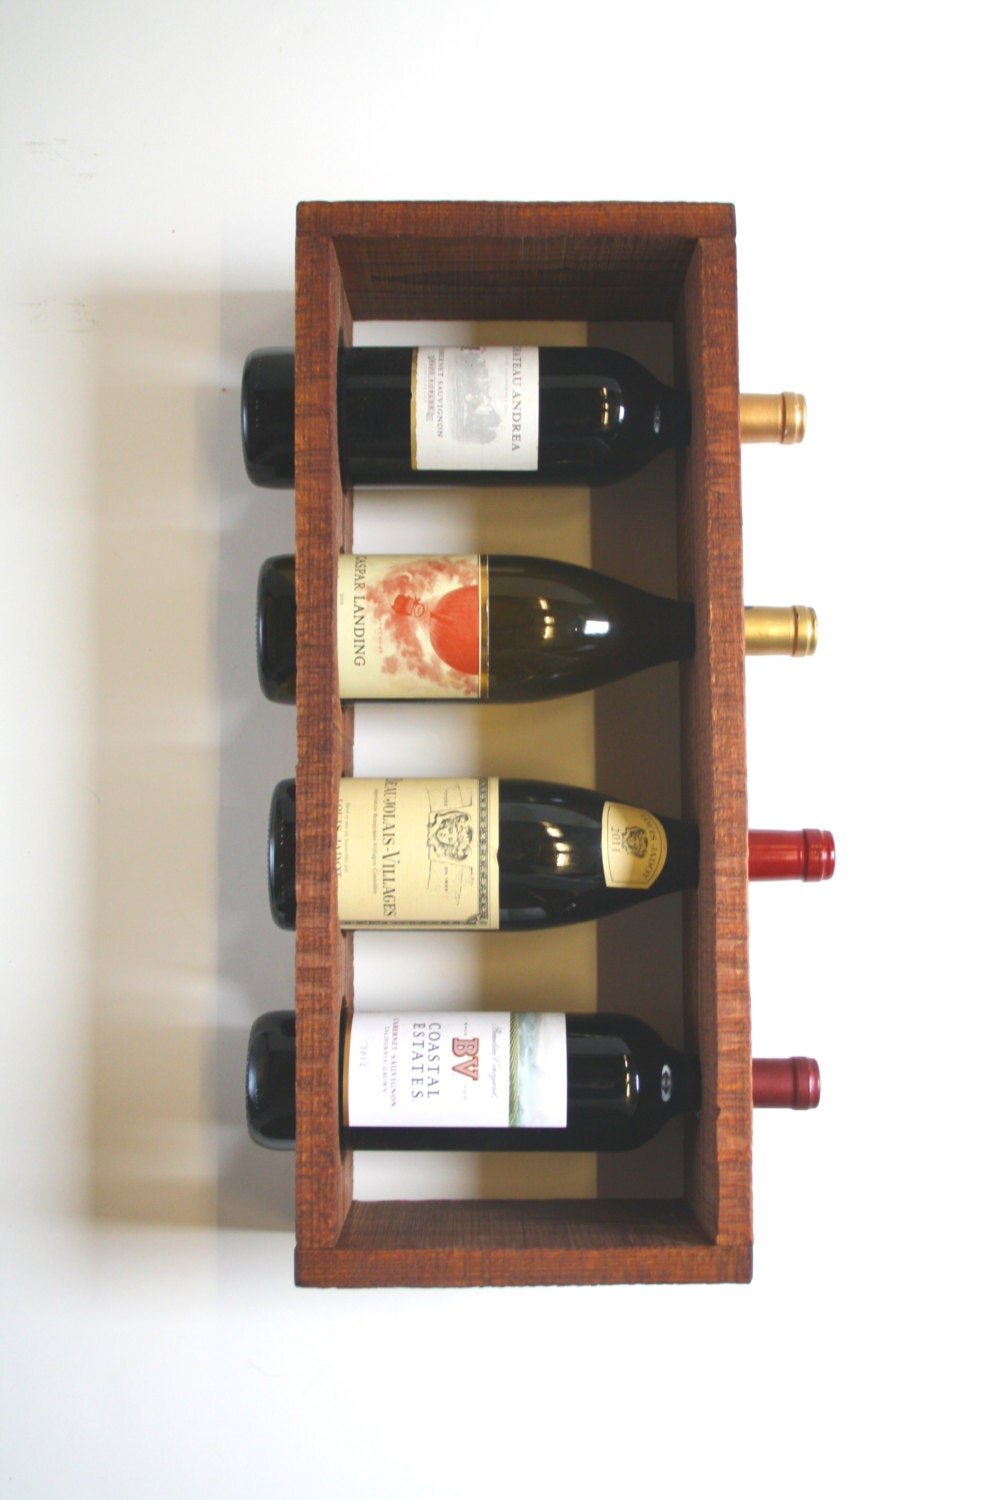 MyGift Wood Wine Box with Straps Bottle Carrier